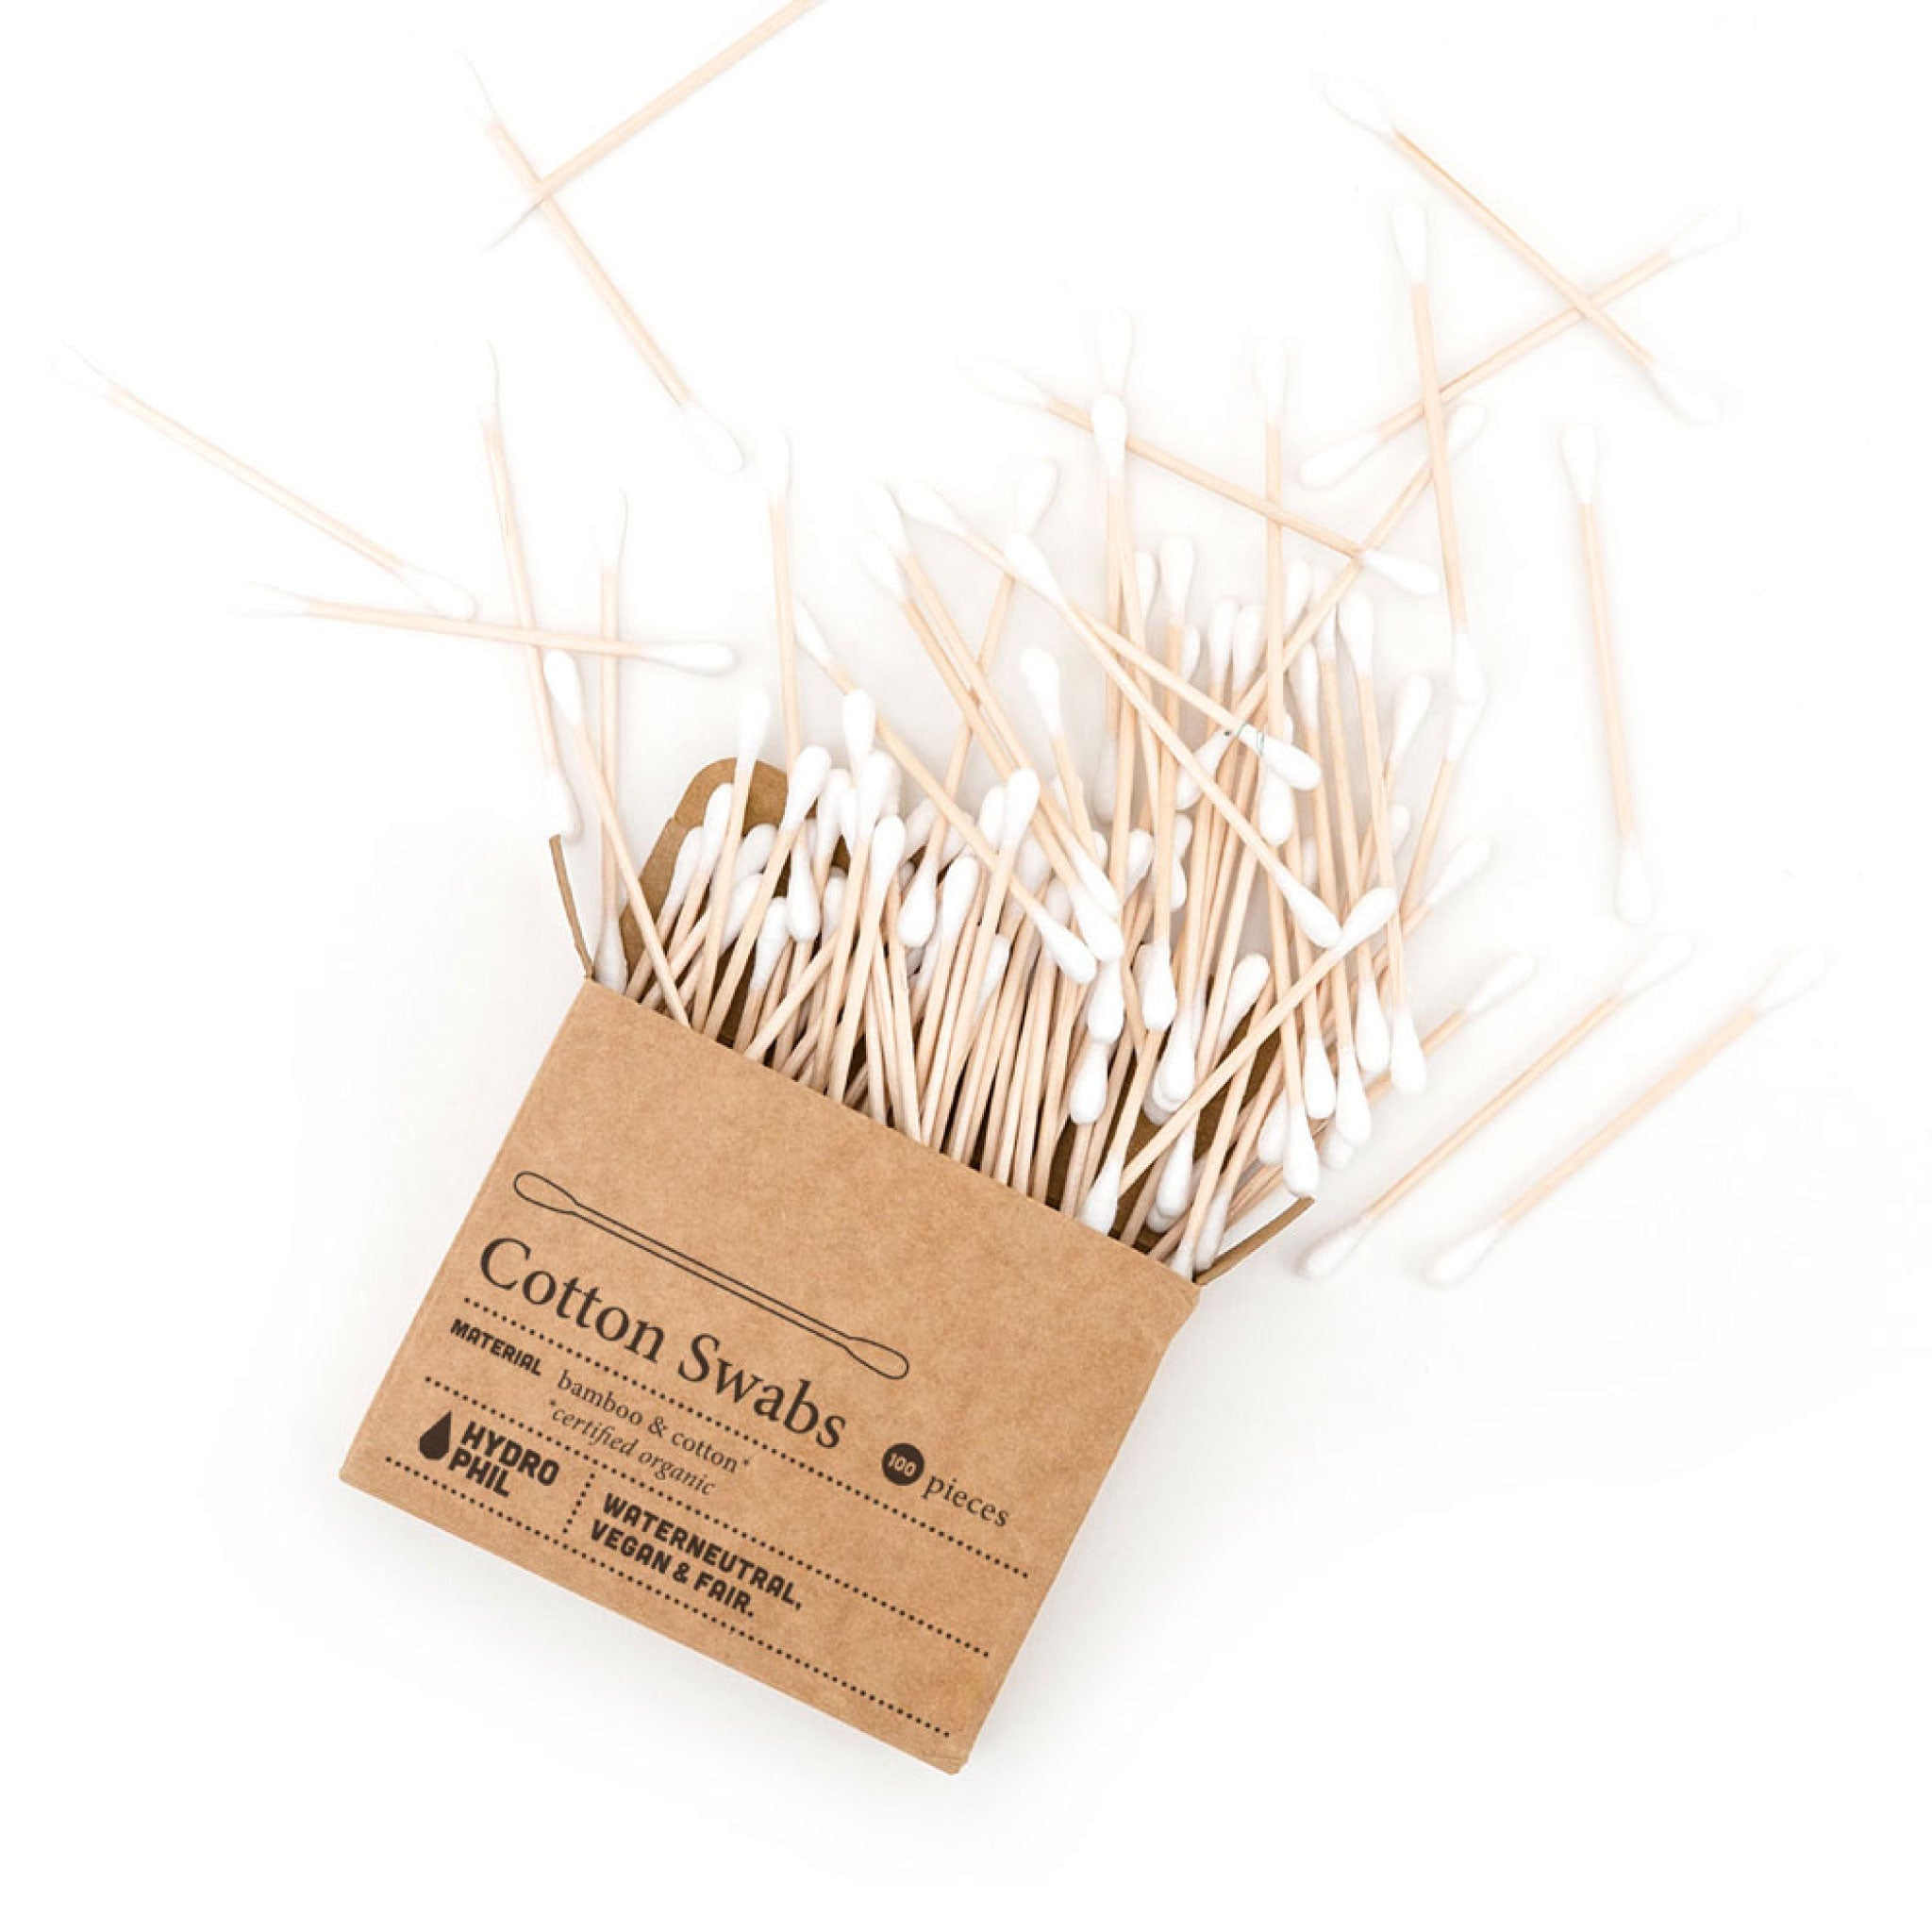 cotton swabs from hydrophil, open box with swabs spread out